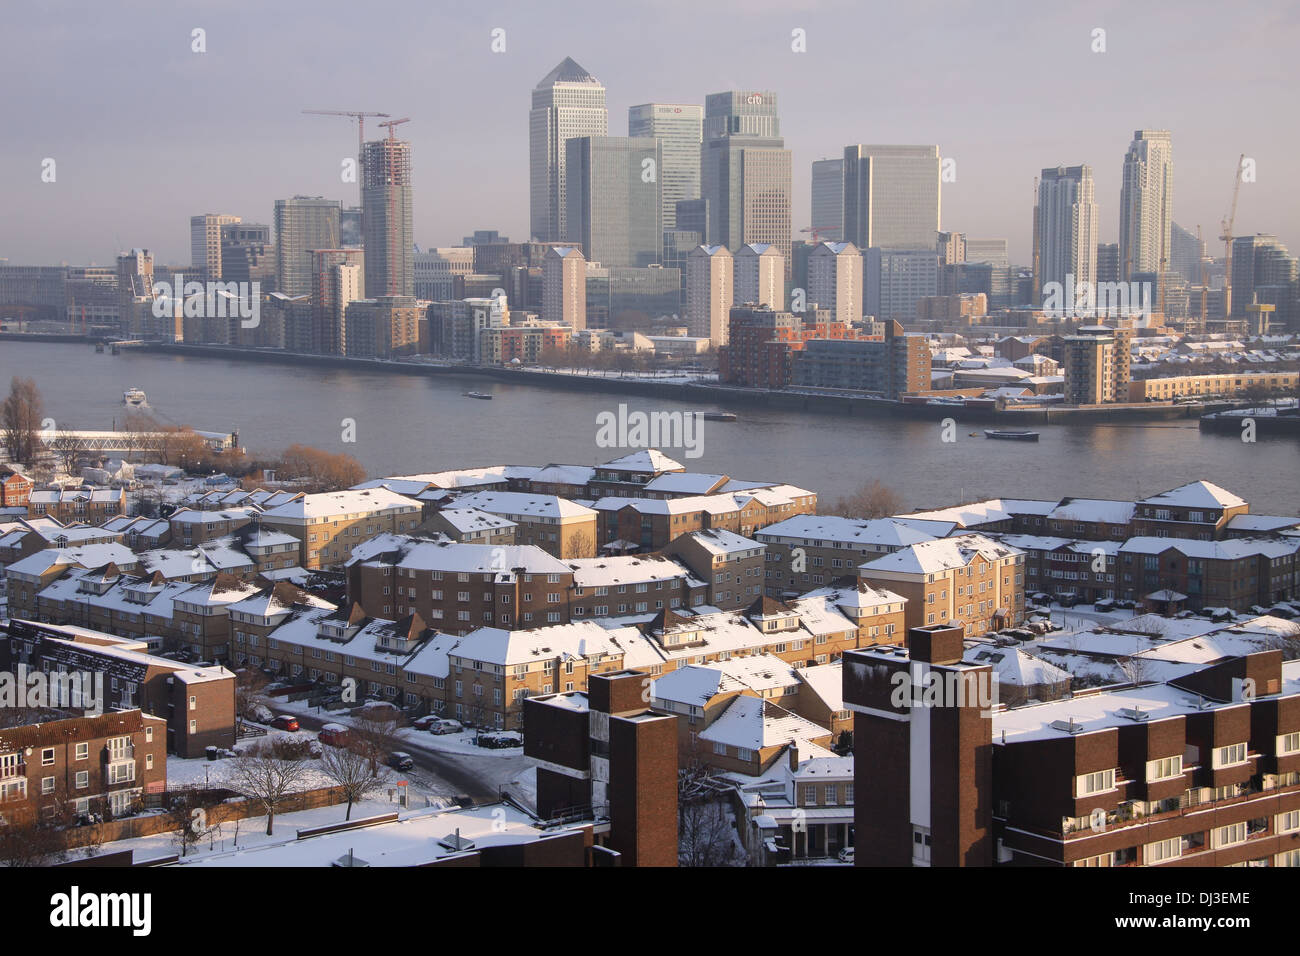 Canary Wharf buildings and Surrey Quays housing covered in snow during winter in London, UK. Stock Photo